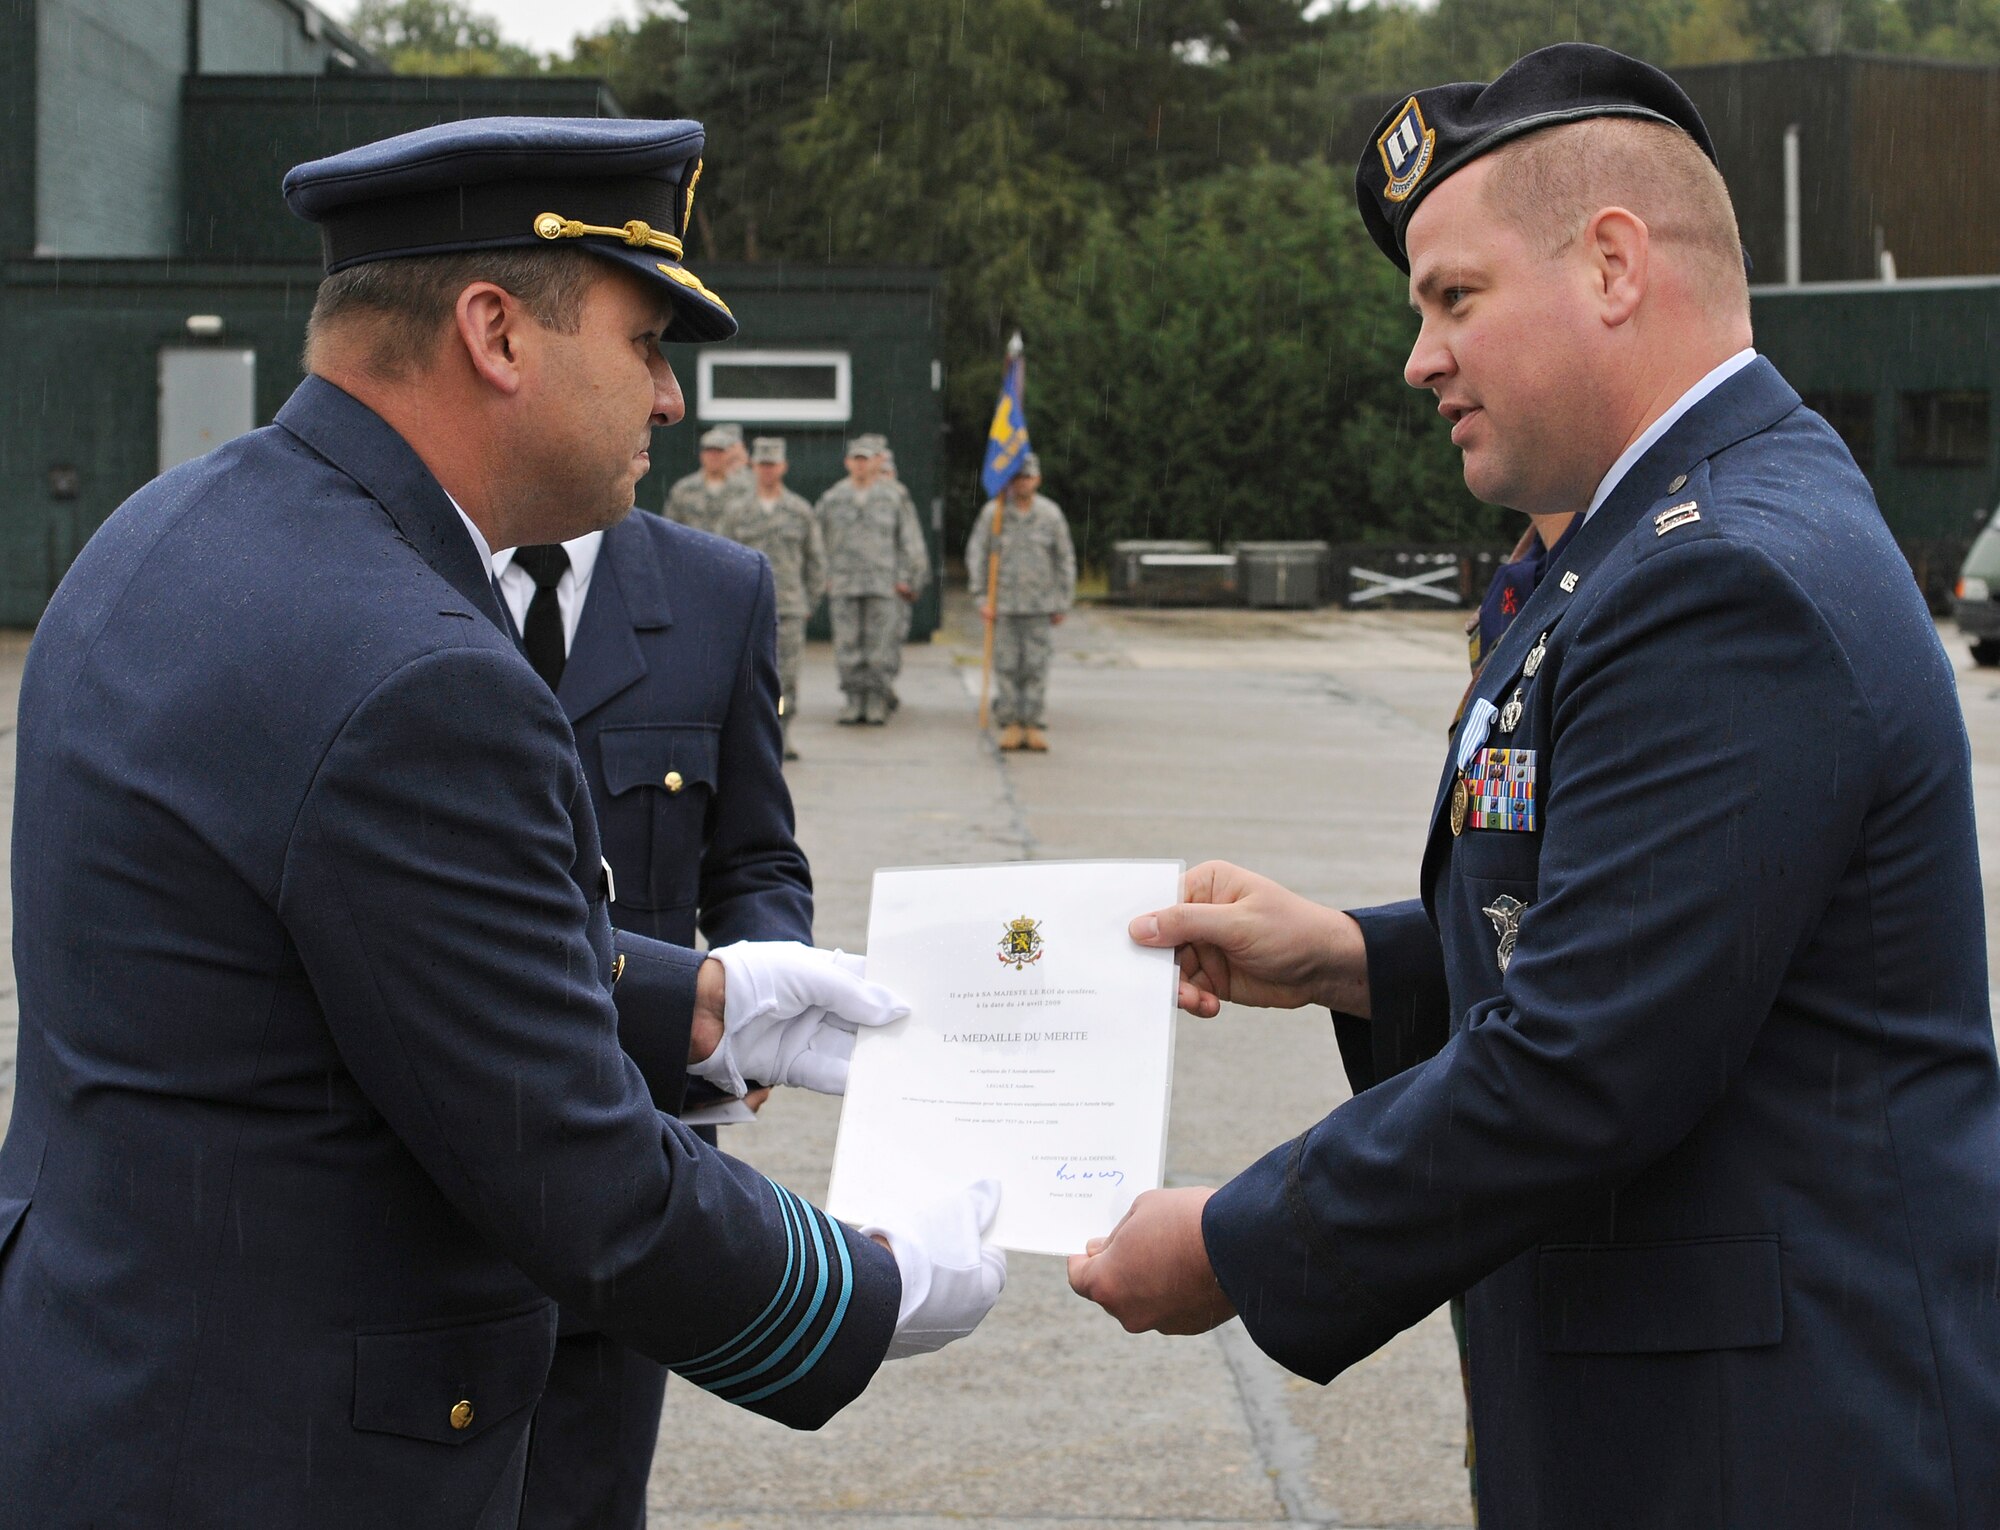 SPANGDAHLEM AIR BASE, Germany – Maj. Gen Claude Van De Voorde, Belgian air force 10th Tactical Wing commander, presents Capt. Andrew Legault, 701st Munitions Support Squadron security forces commander, with a certificate for the Belgian Meritorious Medal during the 10th TW change of command ceremony Sept. 1. Captain Legault received the medal for outstanding efforts resulting in excellent ratings during the most recent weapons inspection at Kleine Brogel Air Base, Belgium. (U.S. Air Force photo/Senior Airman Benjamin Wilson)